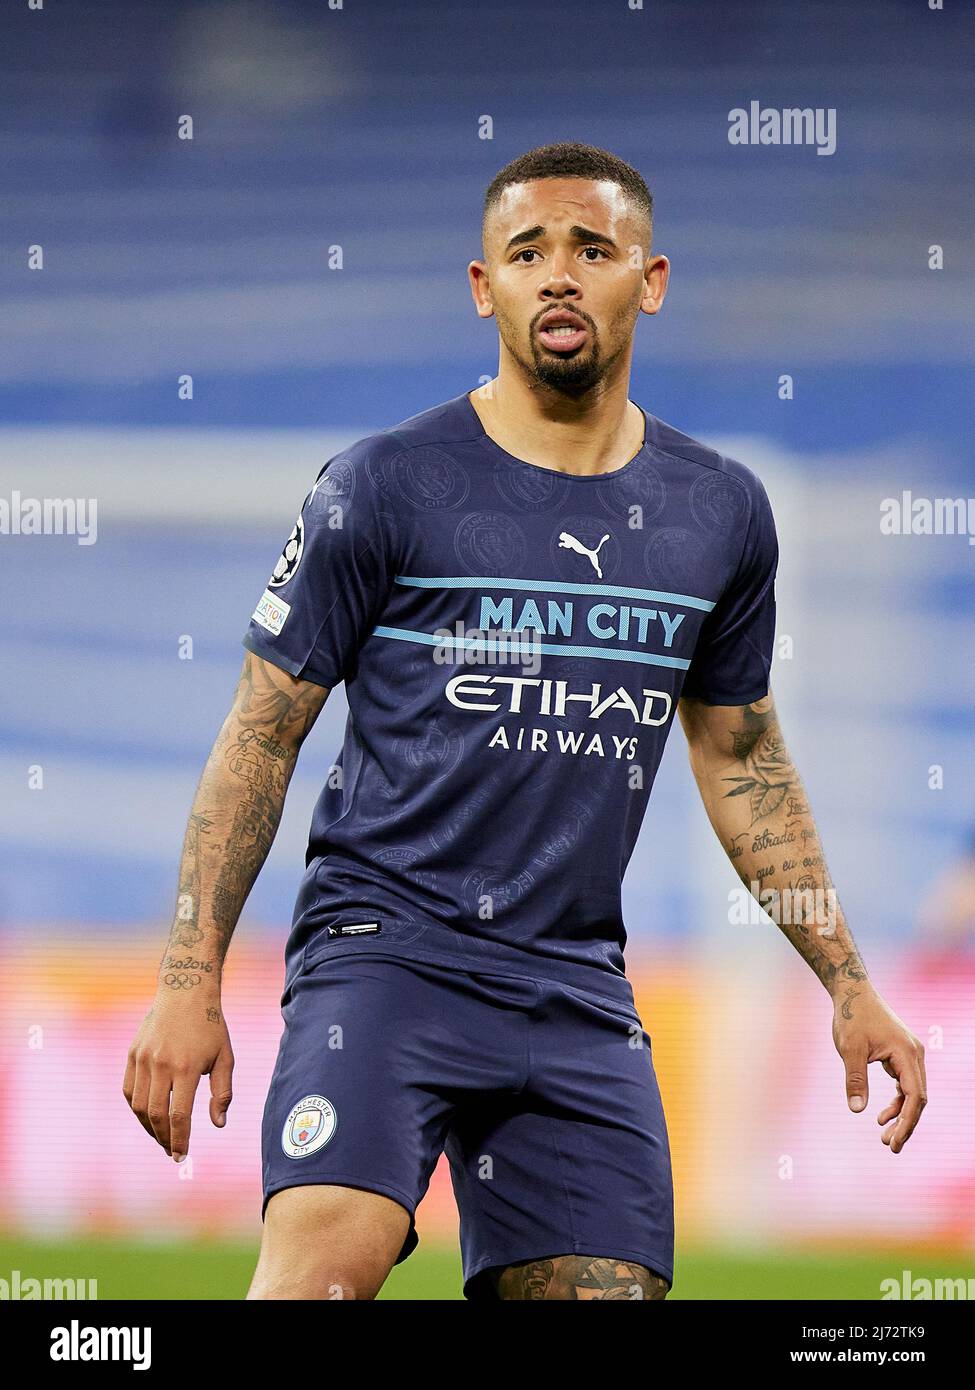 Gabriel Jesus of Manchester City during the UEFA Champions League match between Real Madrid and Mancheaster City played at Santiago Bernabeu Stadium on May 4, 2021 in Madrid Spain. (Photo by Ruben Albarran / PRESSINPHOTO) Stock Photo